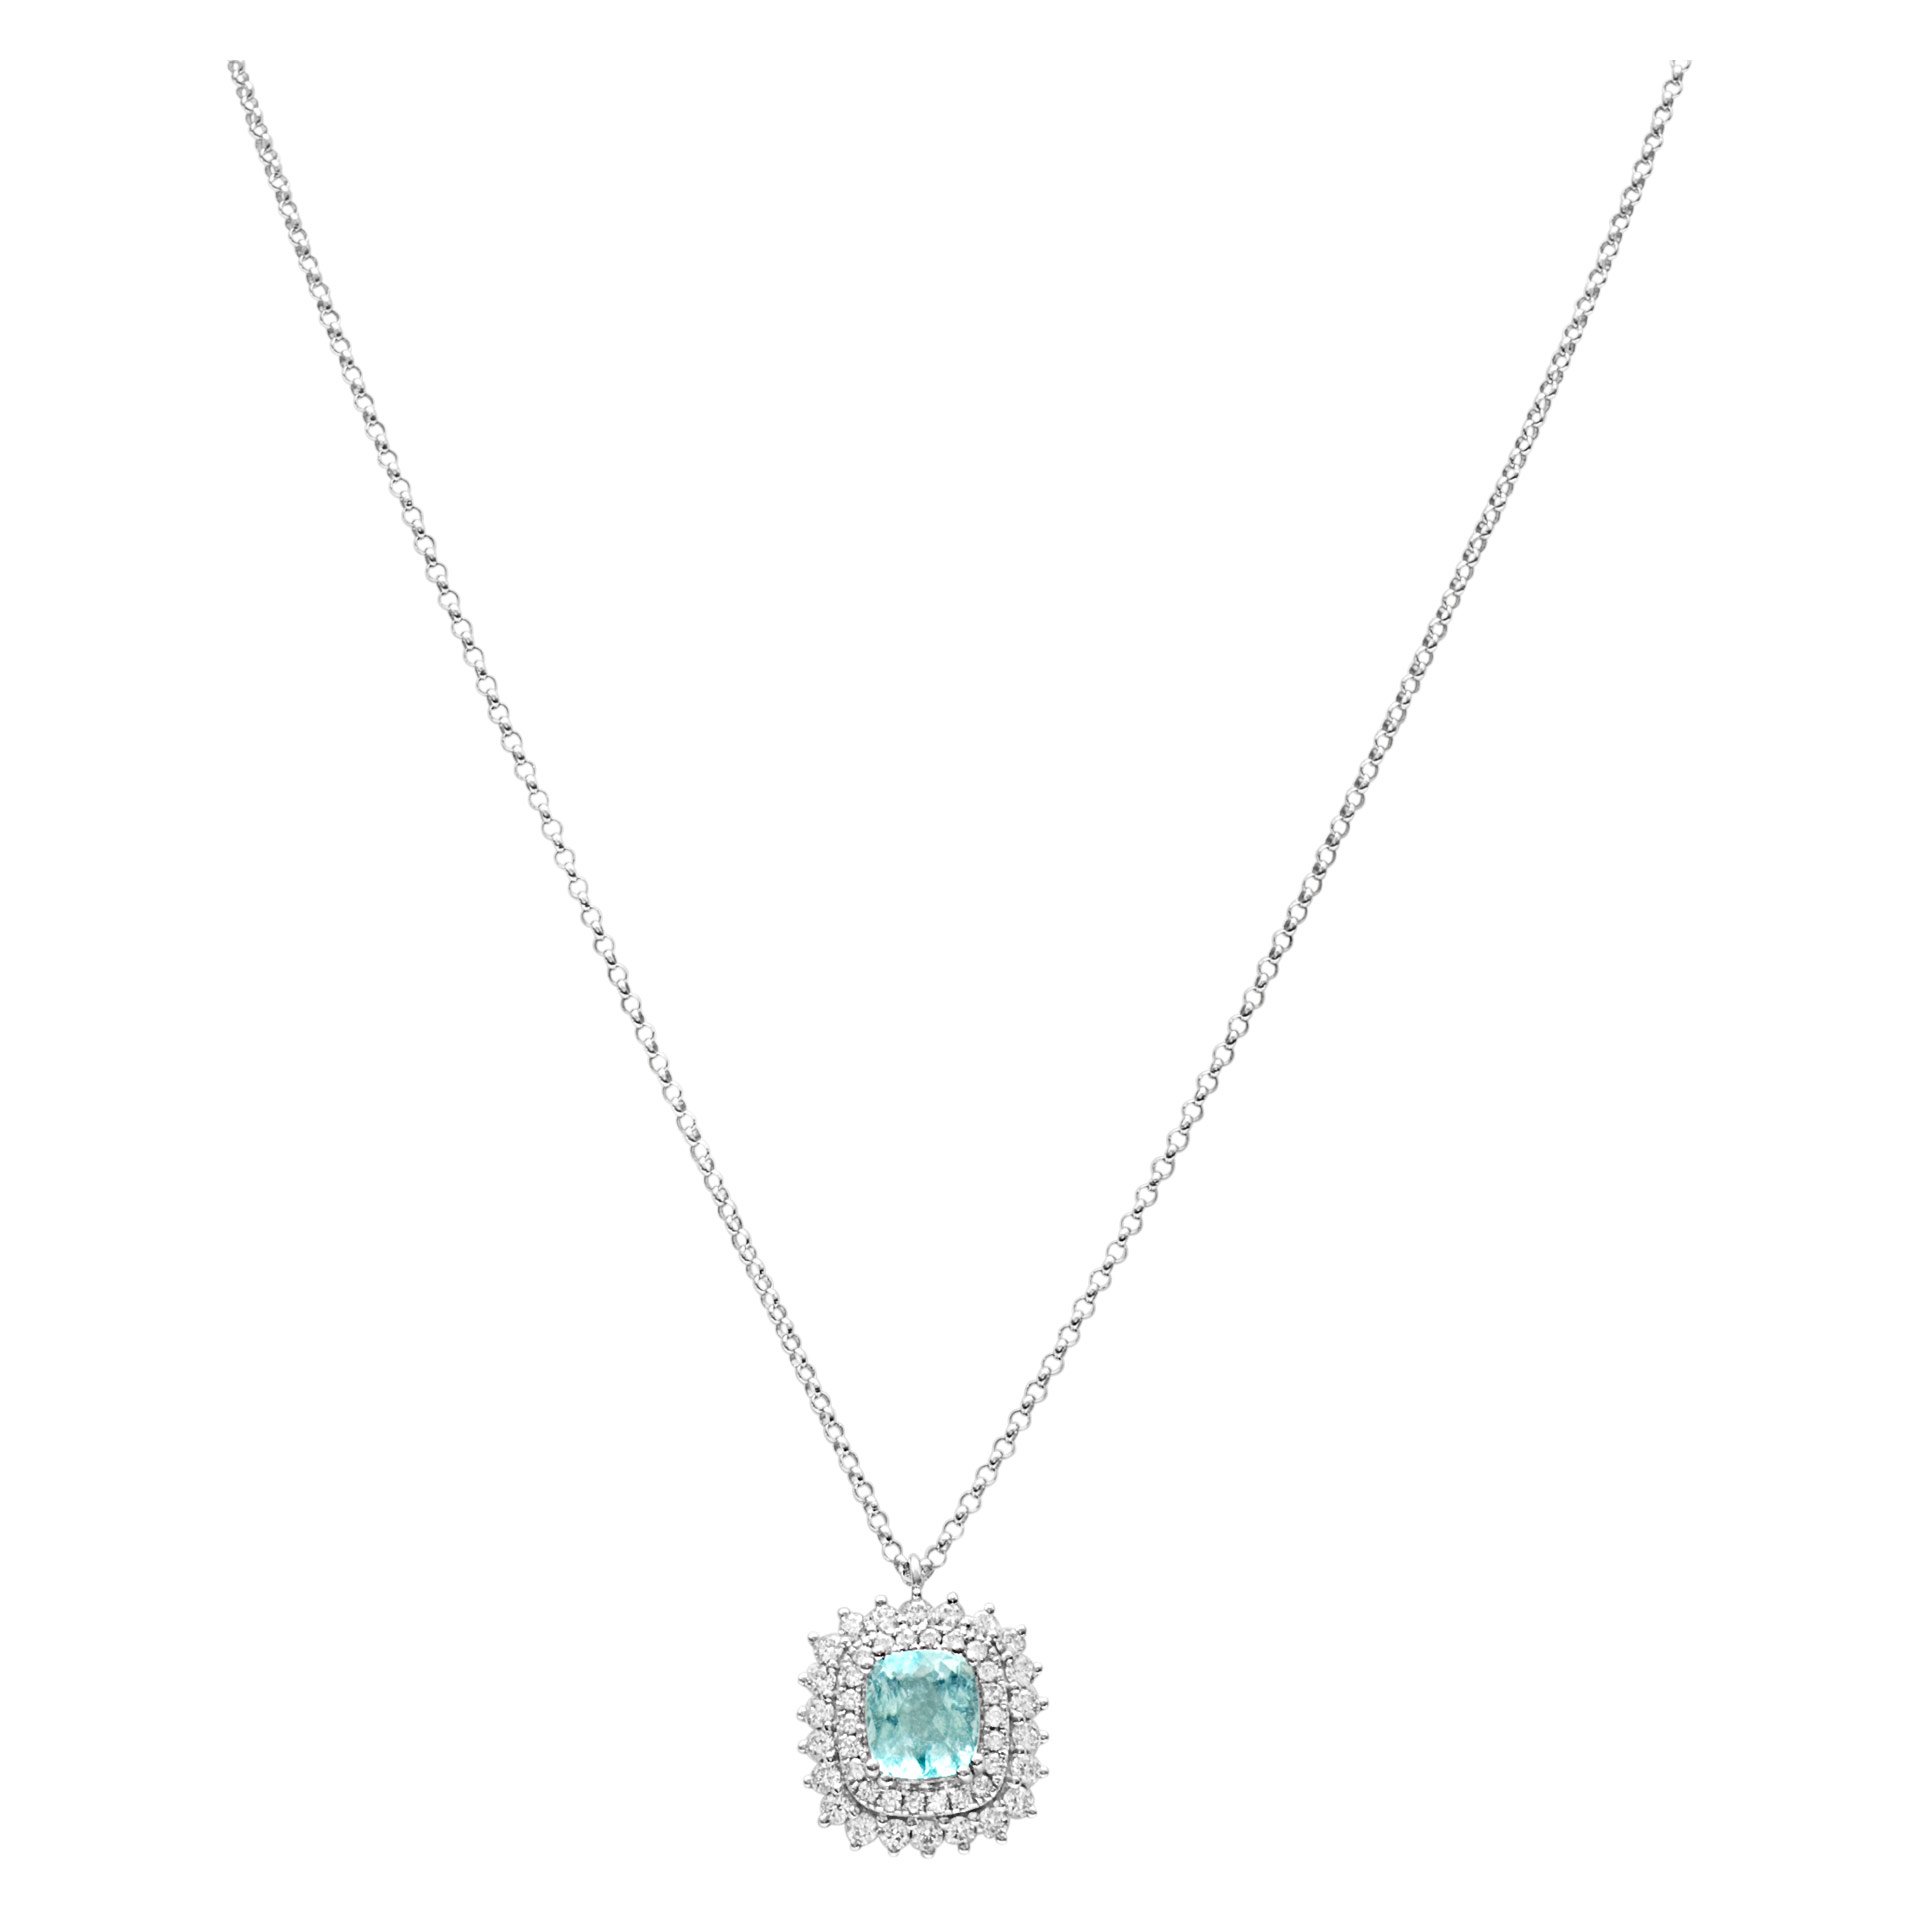 Diamond and Paraiba Tourmaline pendant with chain in 18K WG with 0.63 cts diam & 0.69 cts tourm image 2